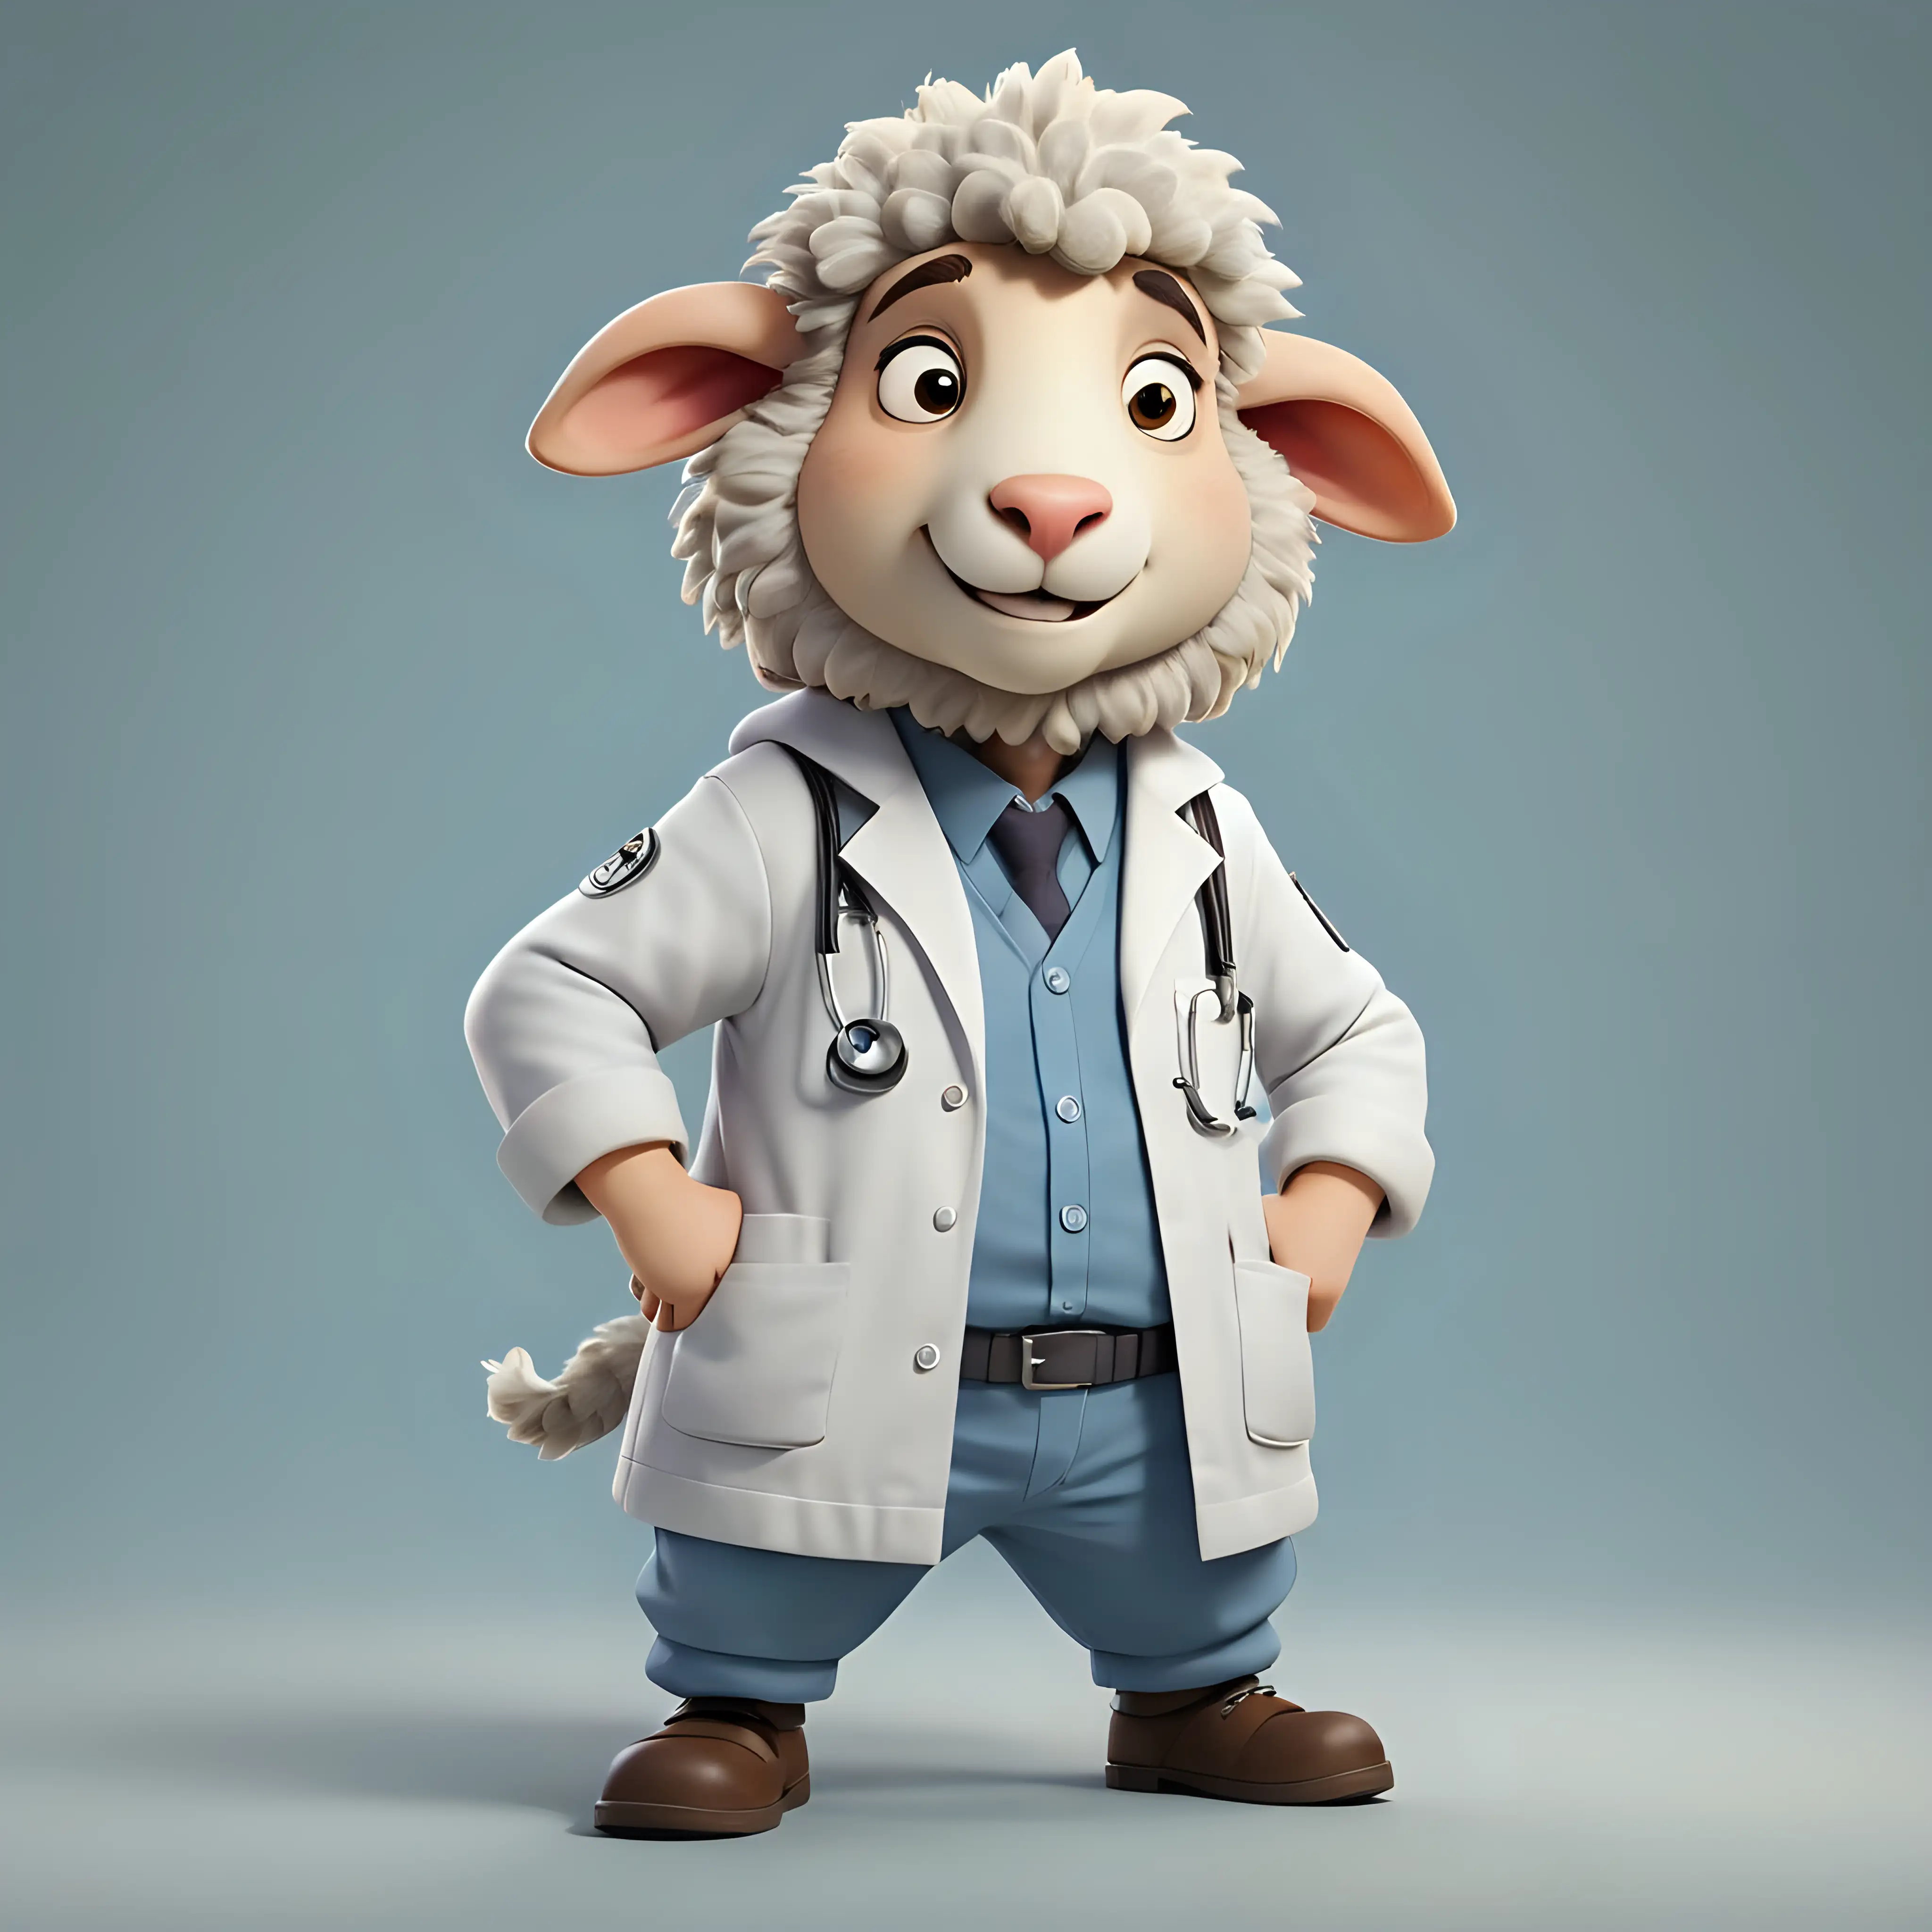 Cartoon Sheep Doctor in Full Body Attire on Clear Background